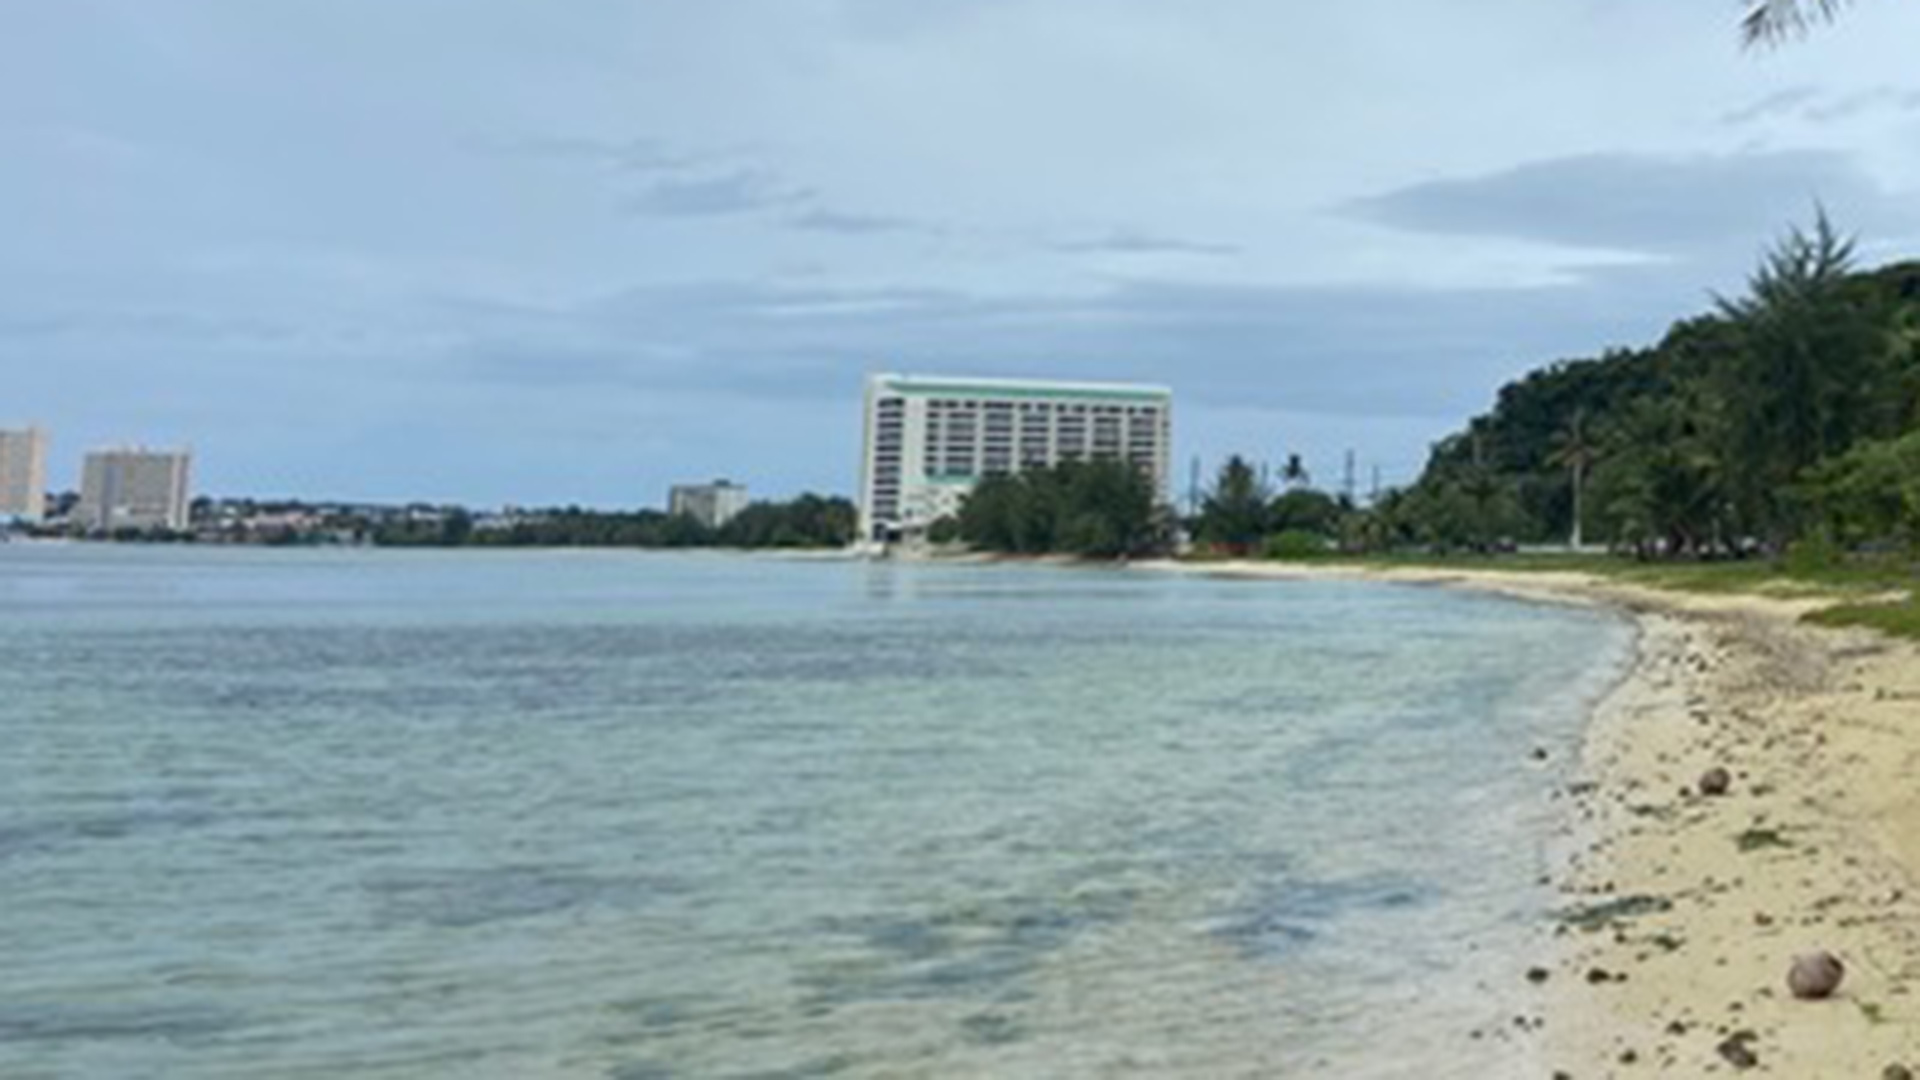 Taken by Lauren Moseley. Caption: Daily walks along Agana Bay Beach with our hotel in the background.